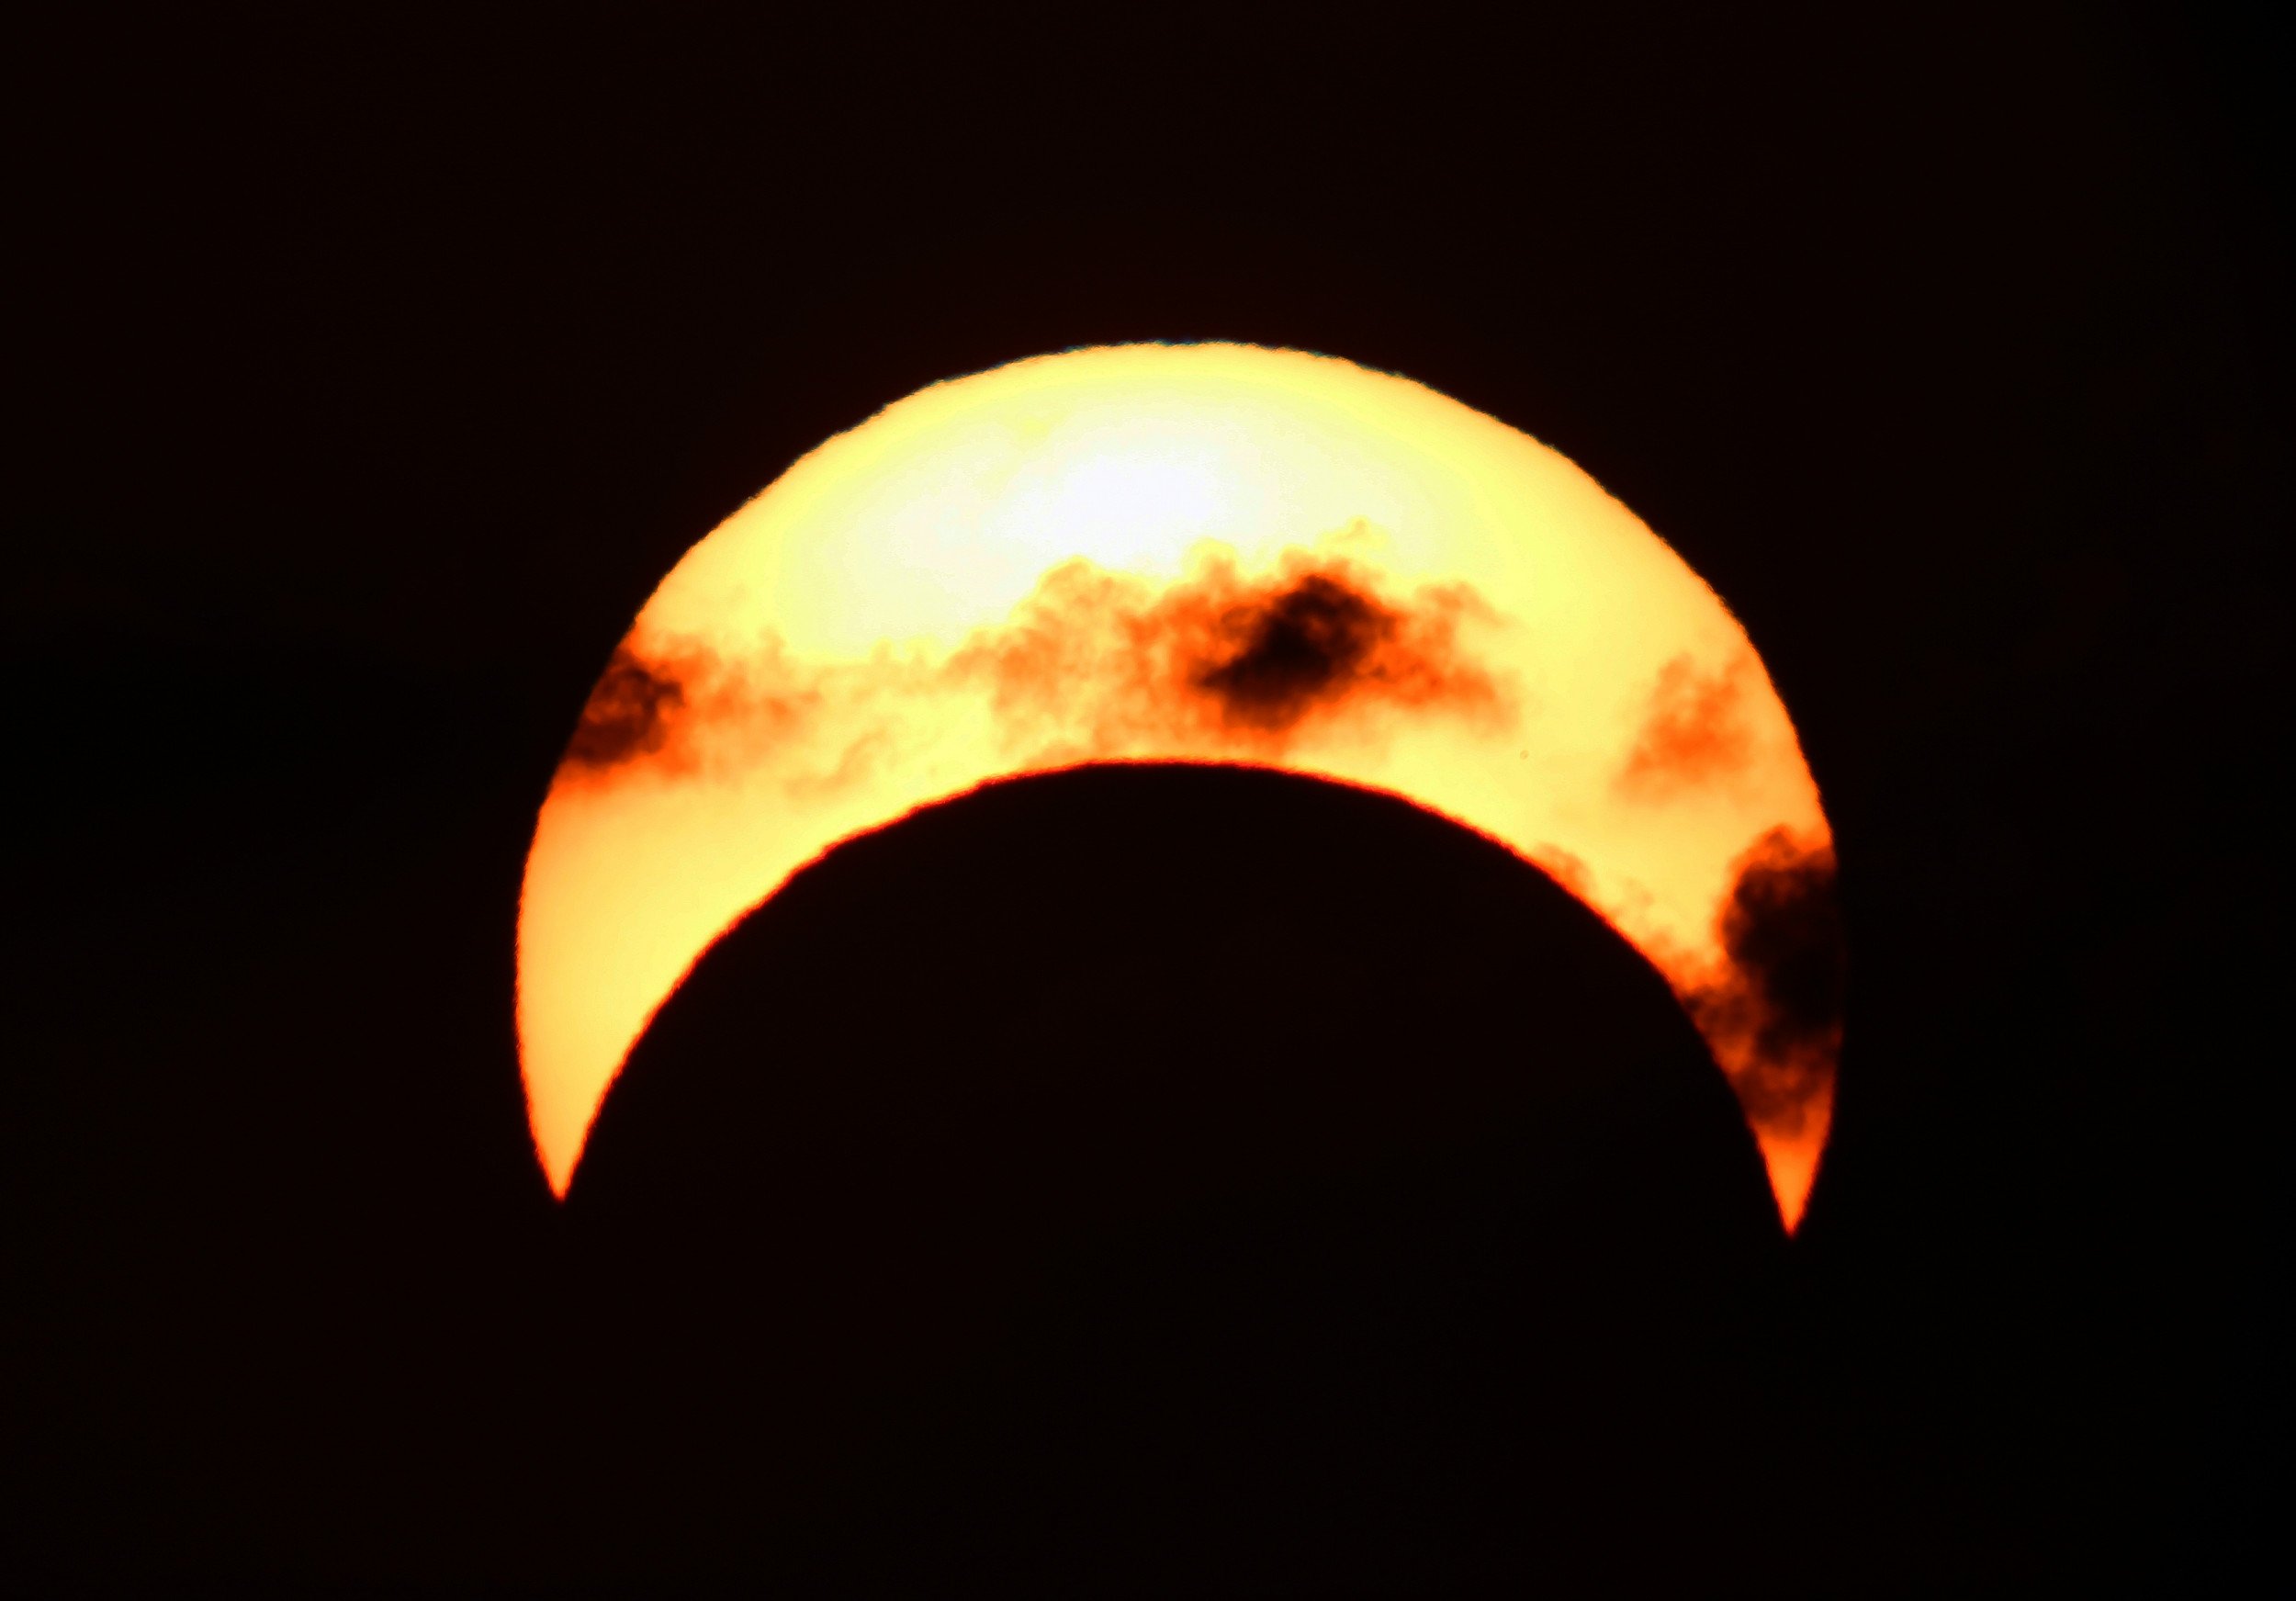 Solar eclipse 2020 live updates: How and when to watch the suraj grahan in Pakistan